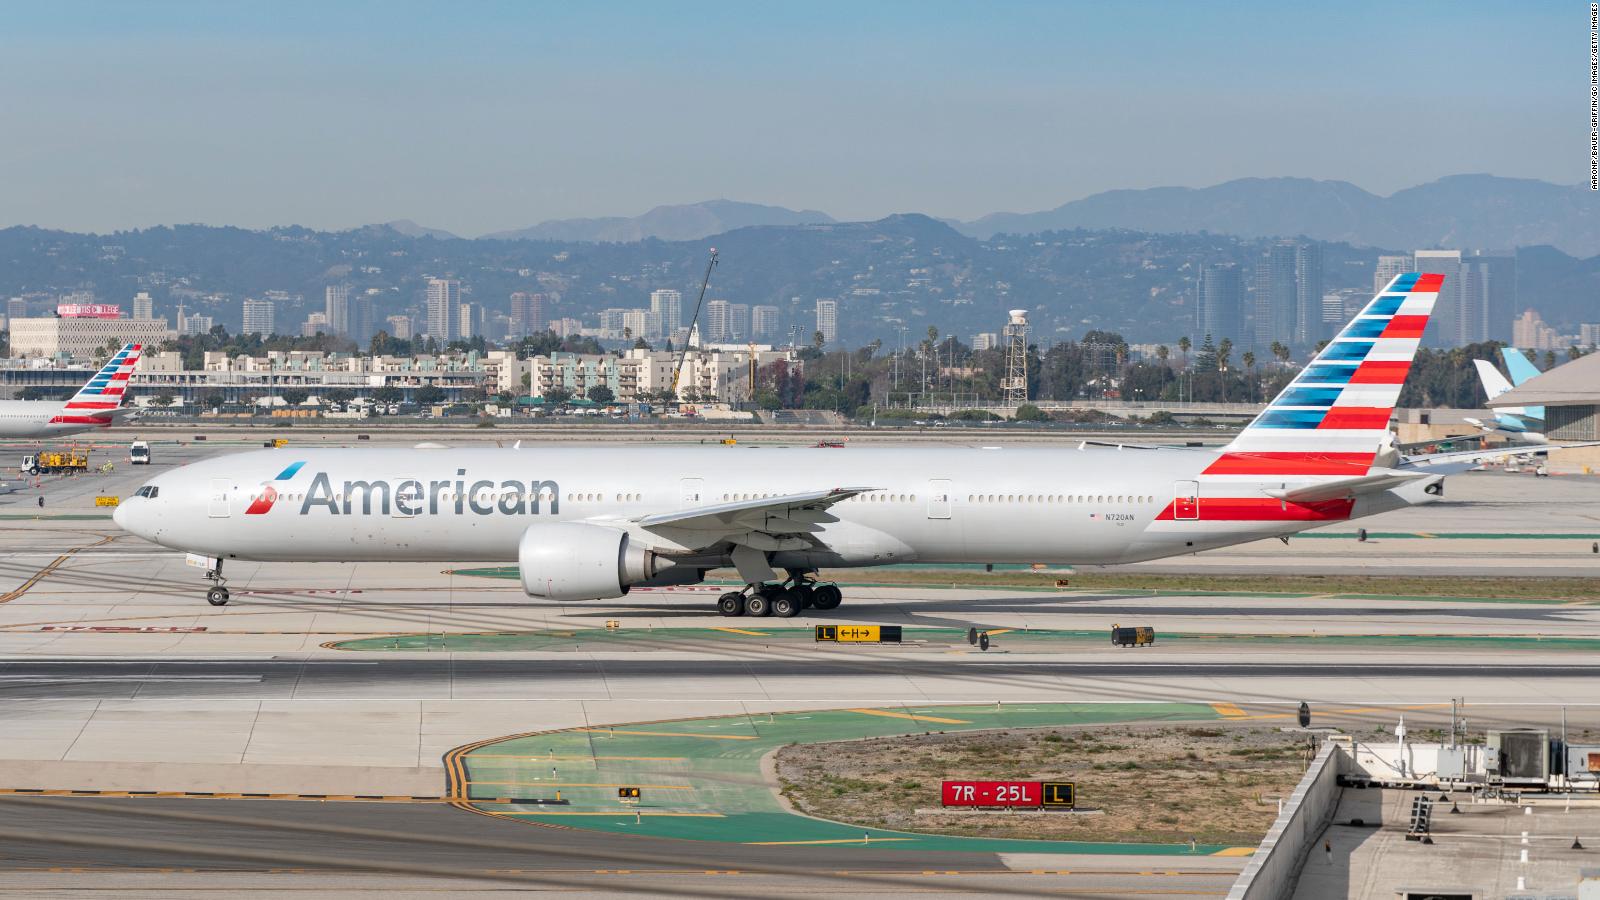 210422064644 Restricted American Airlines Plane California 0113 Full 169 